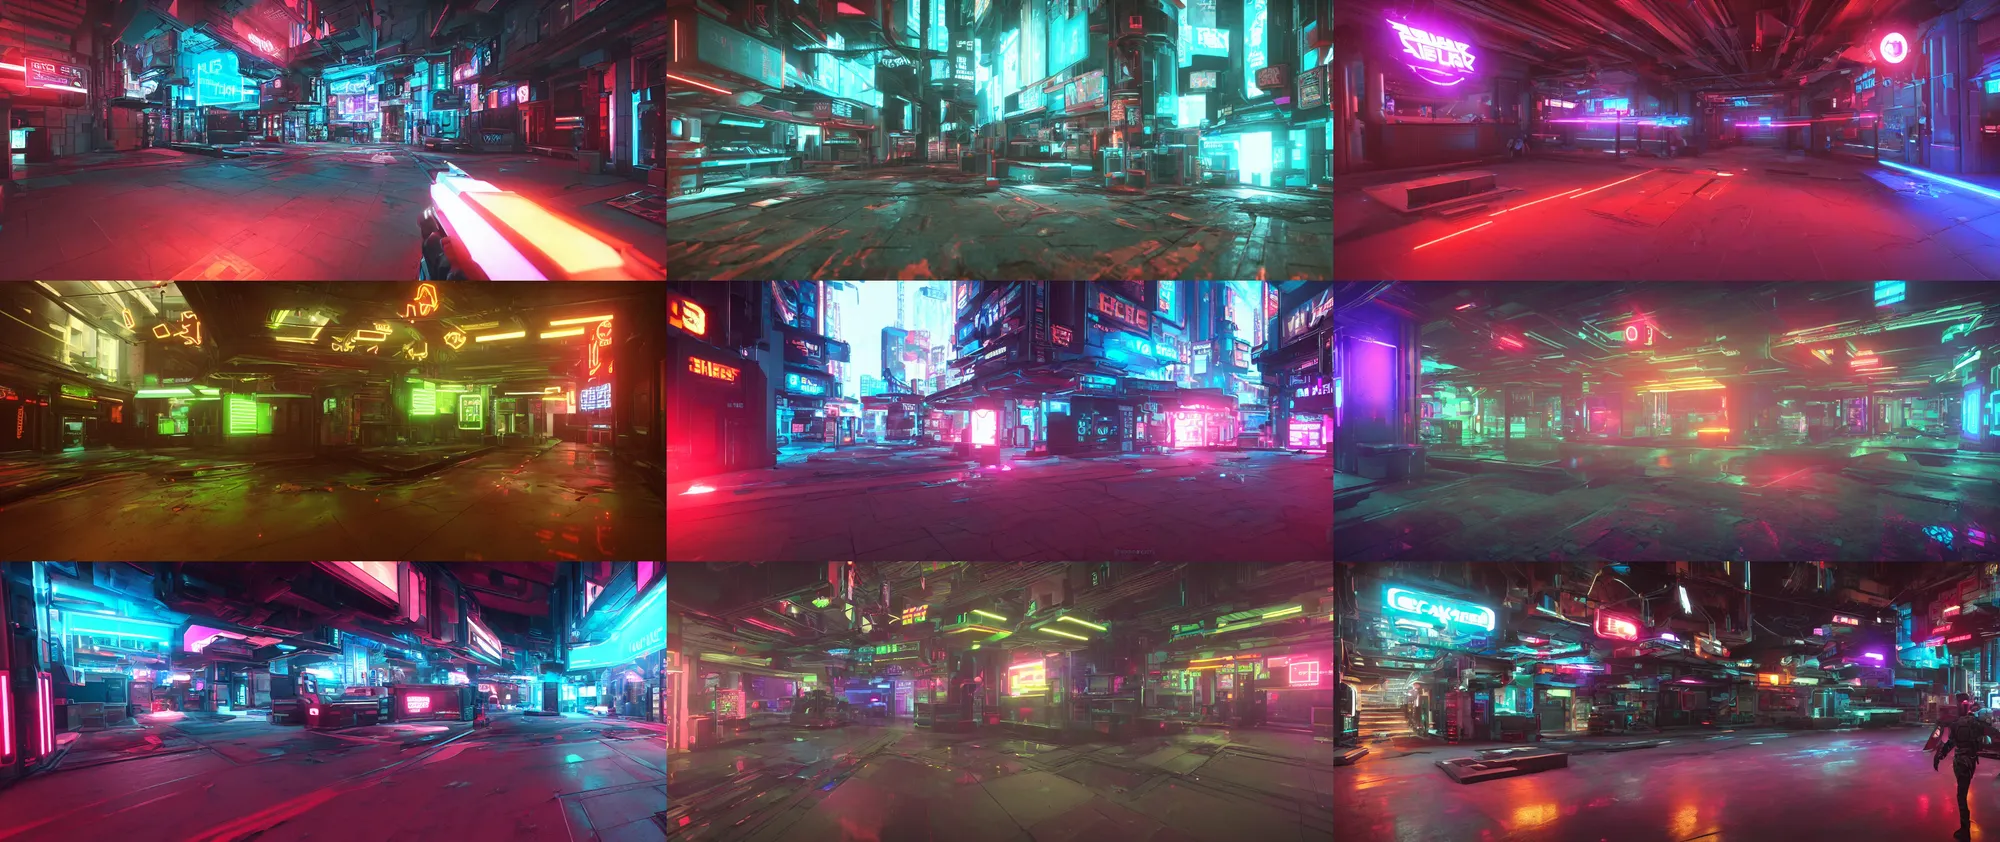 Prompt: Octane render, 3d model, Cyberpunk sci-fi First person shooter videogame level design. Inspired by the design of a glowing neon shop sign. First person perspective. Gameplay screenshot.